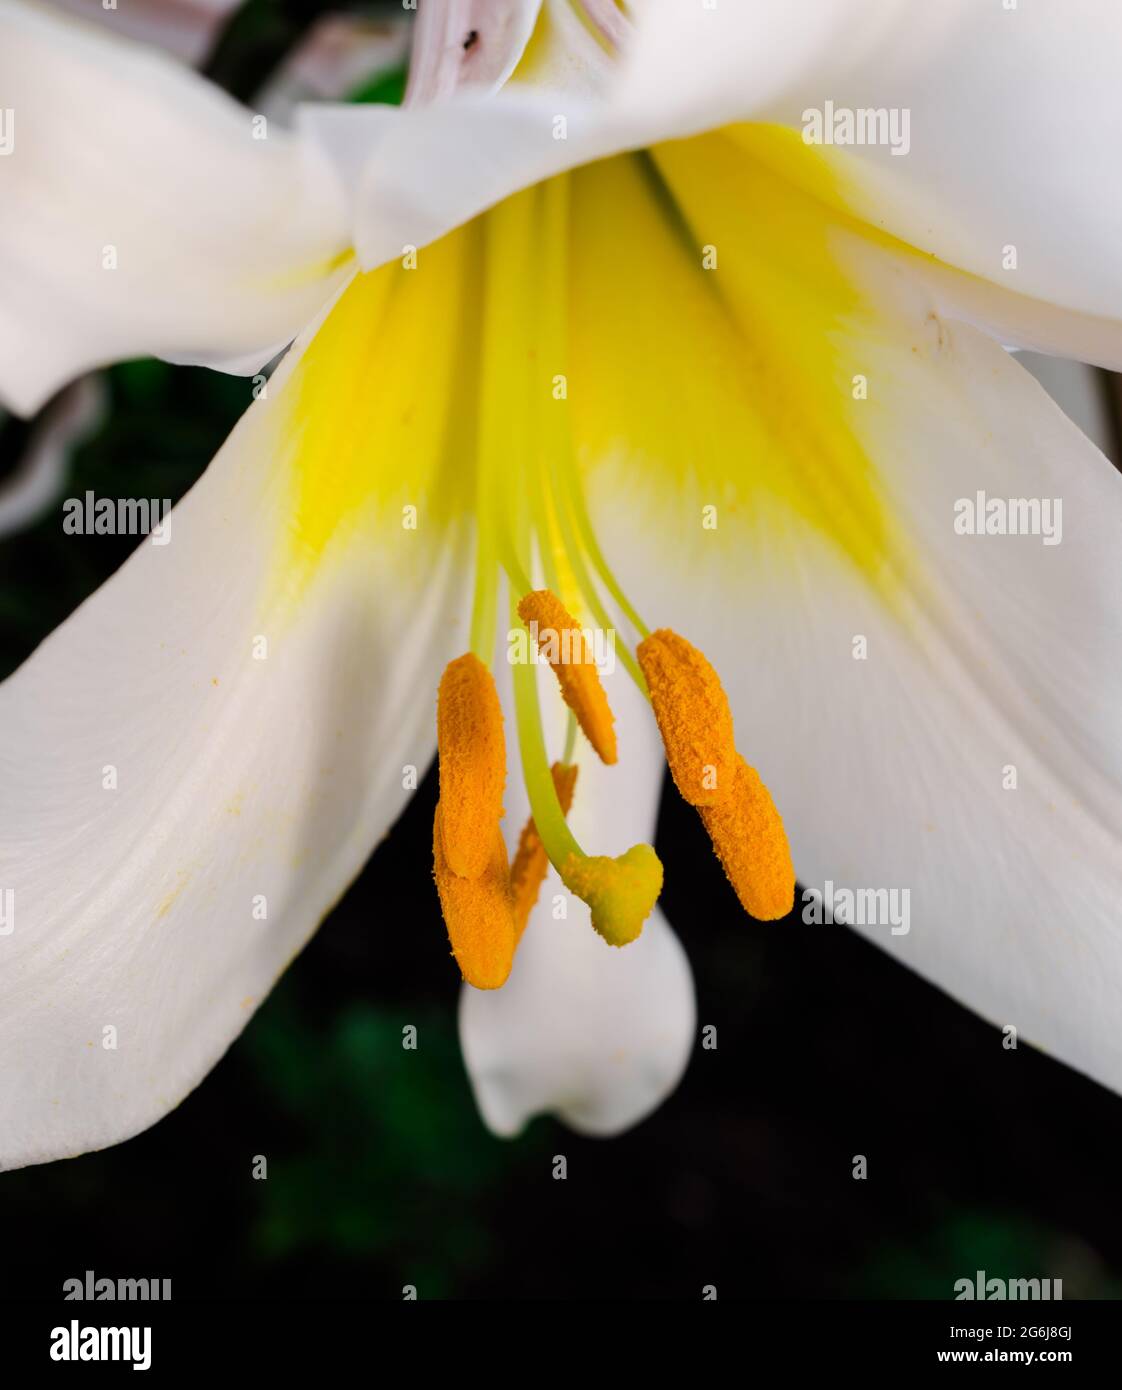 Lily flower with white petals, pistil and stamens close-up Stock Photo